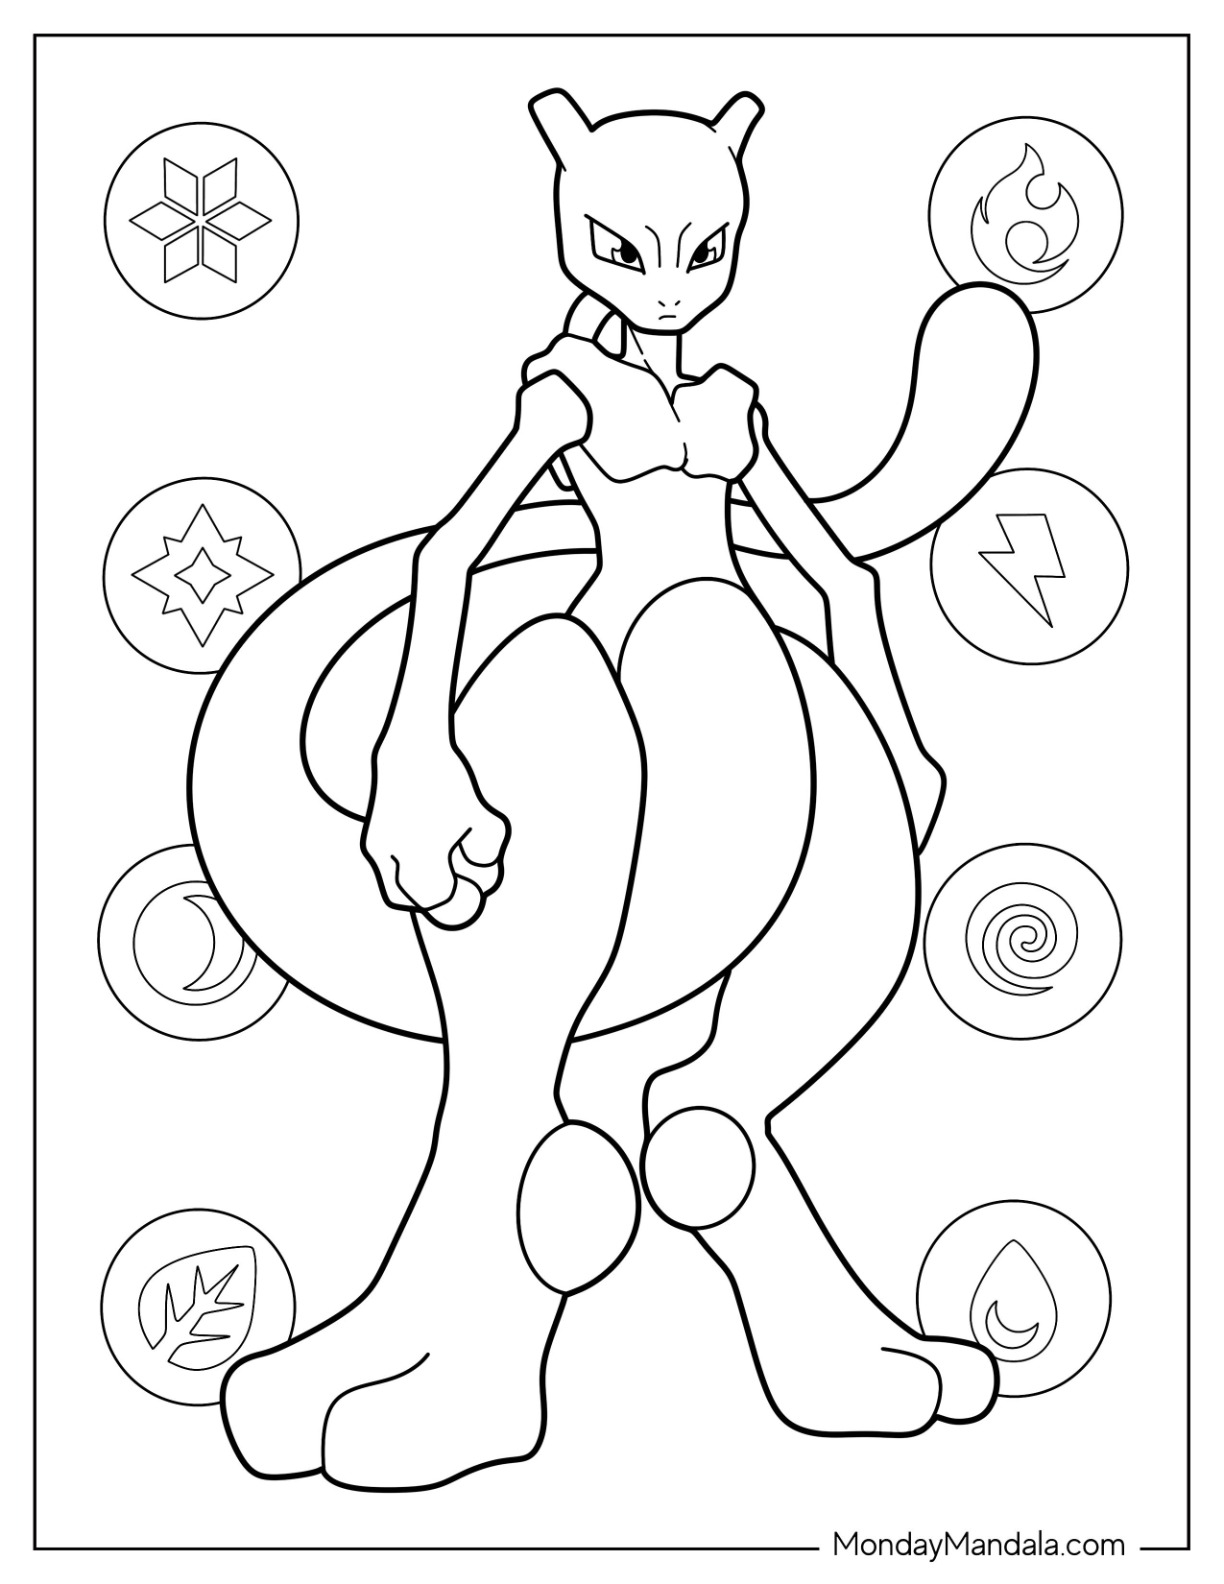 Mewtwo coloring pages free pdf printables